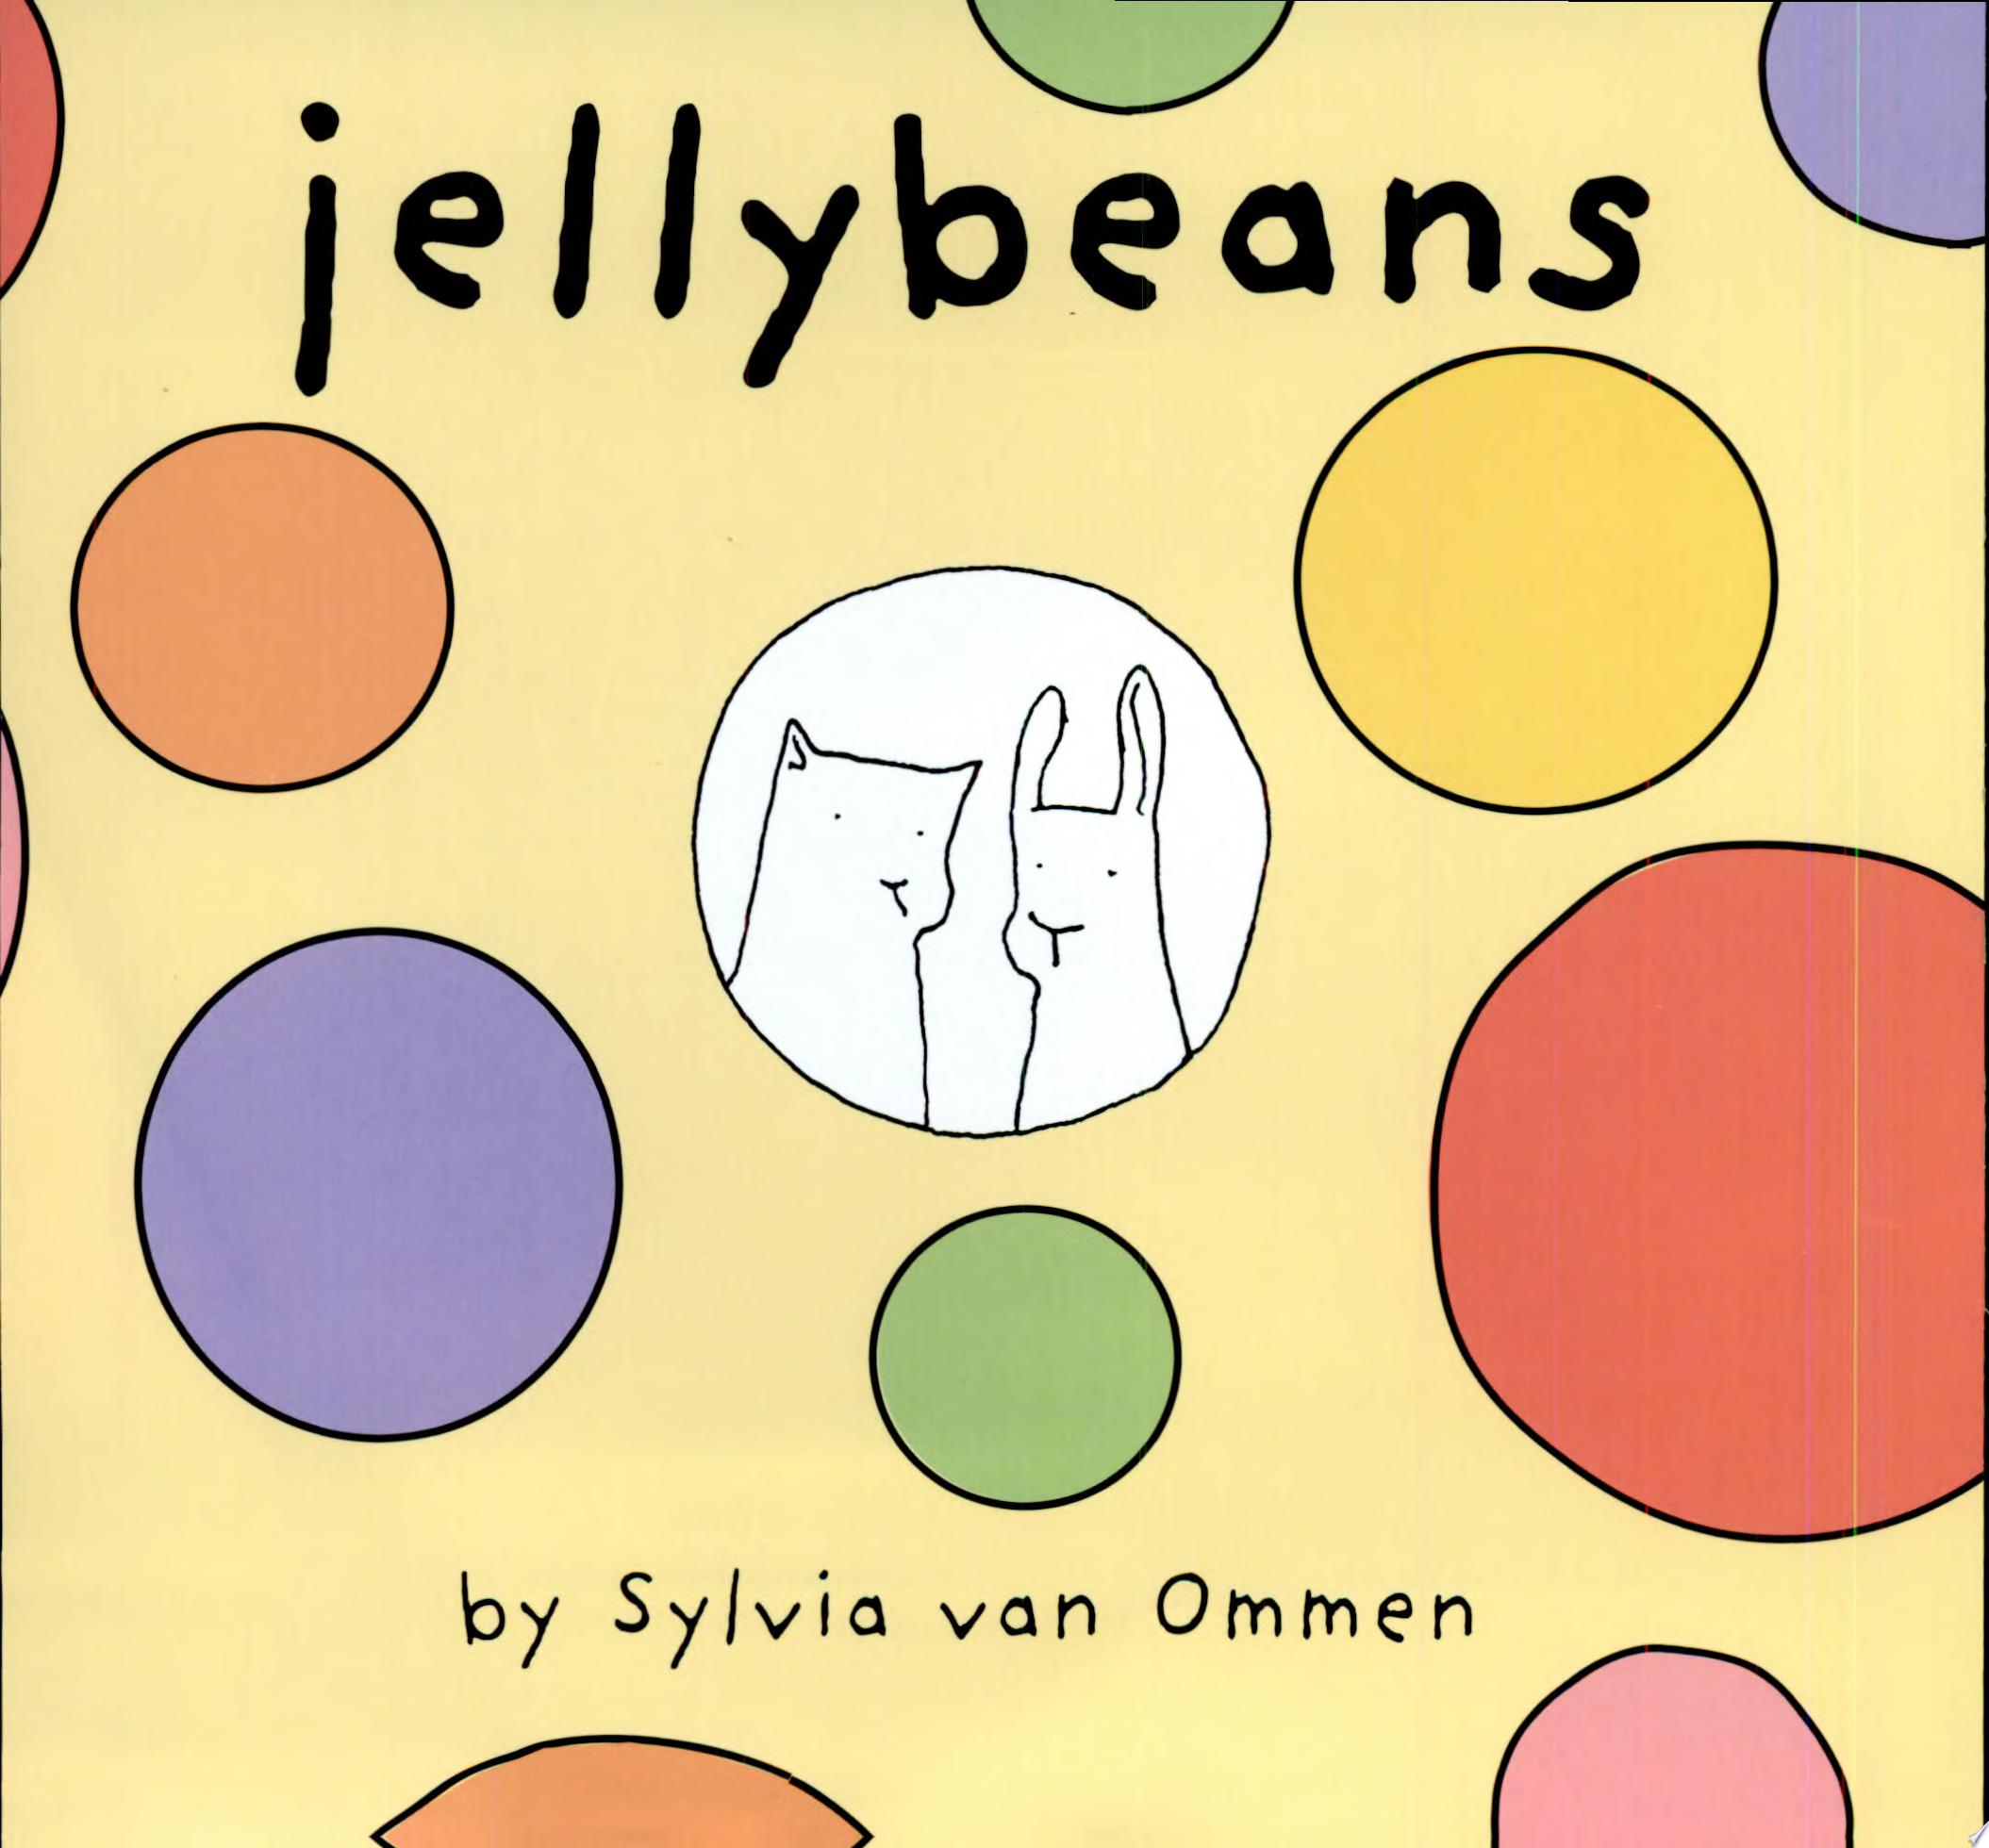 Image for "Jellybeans"